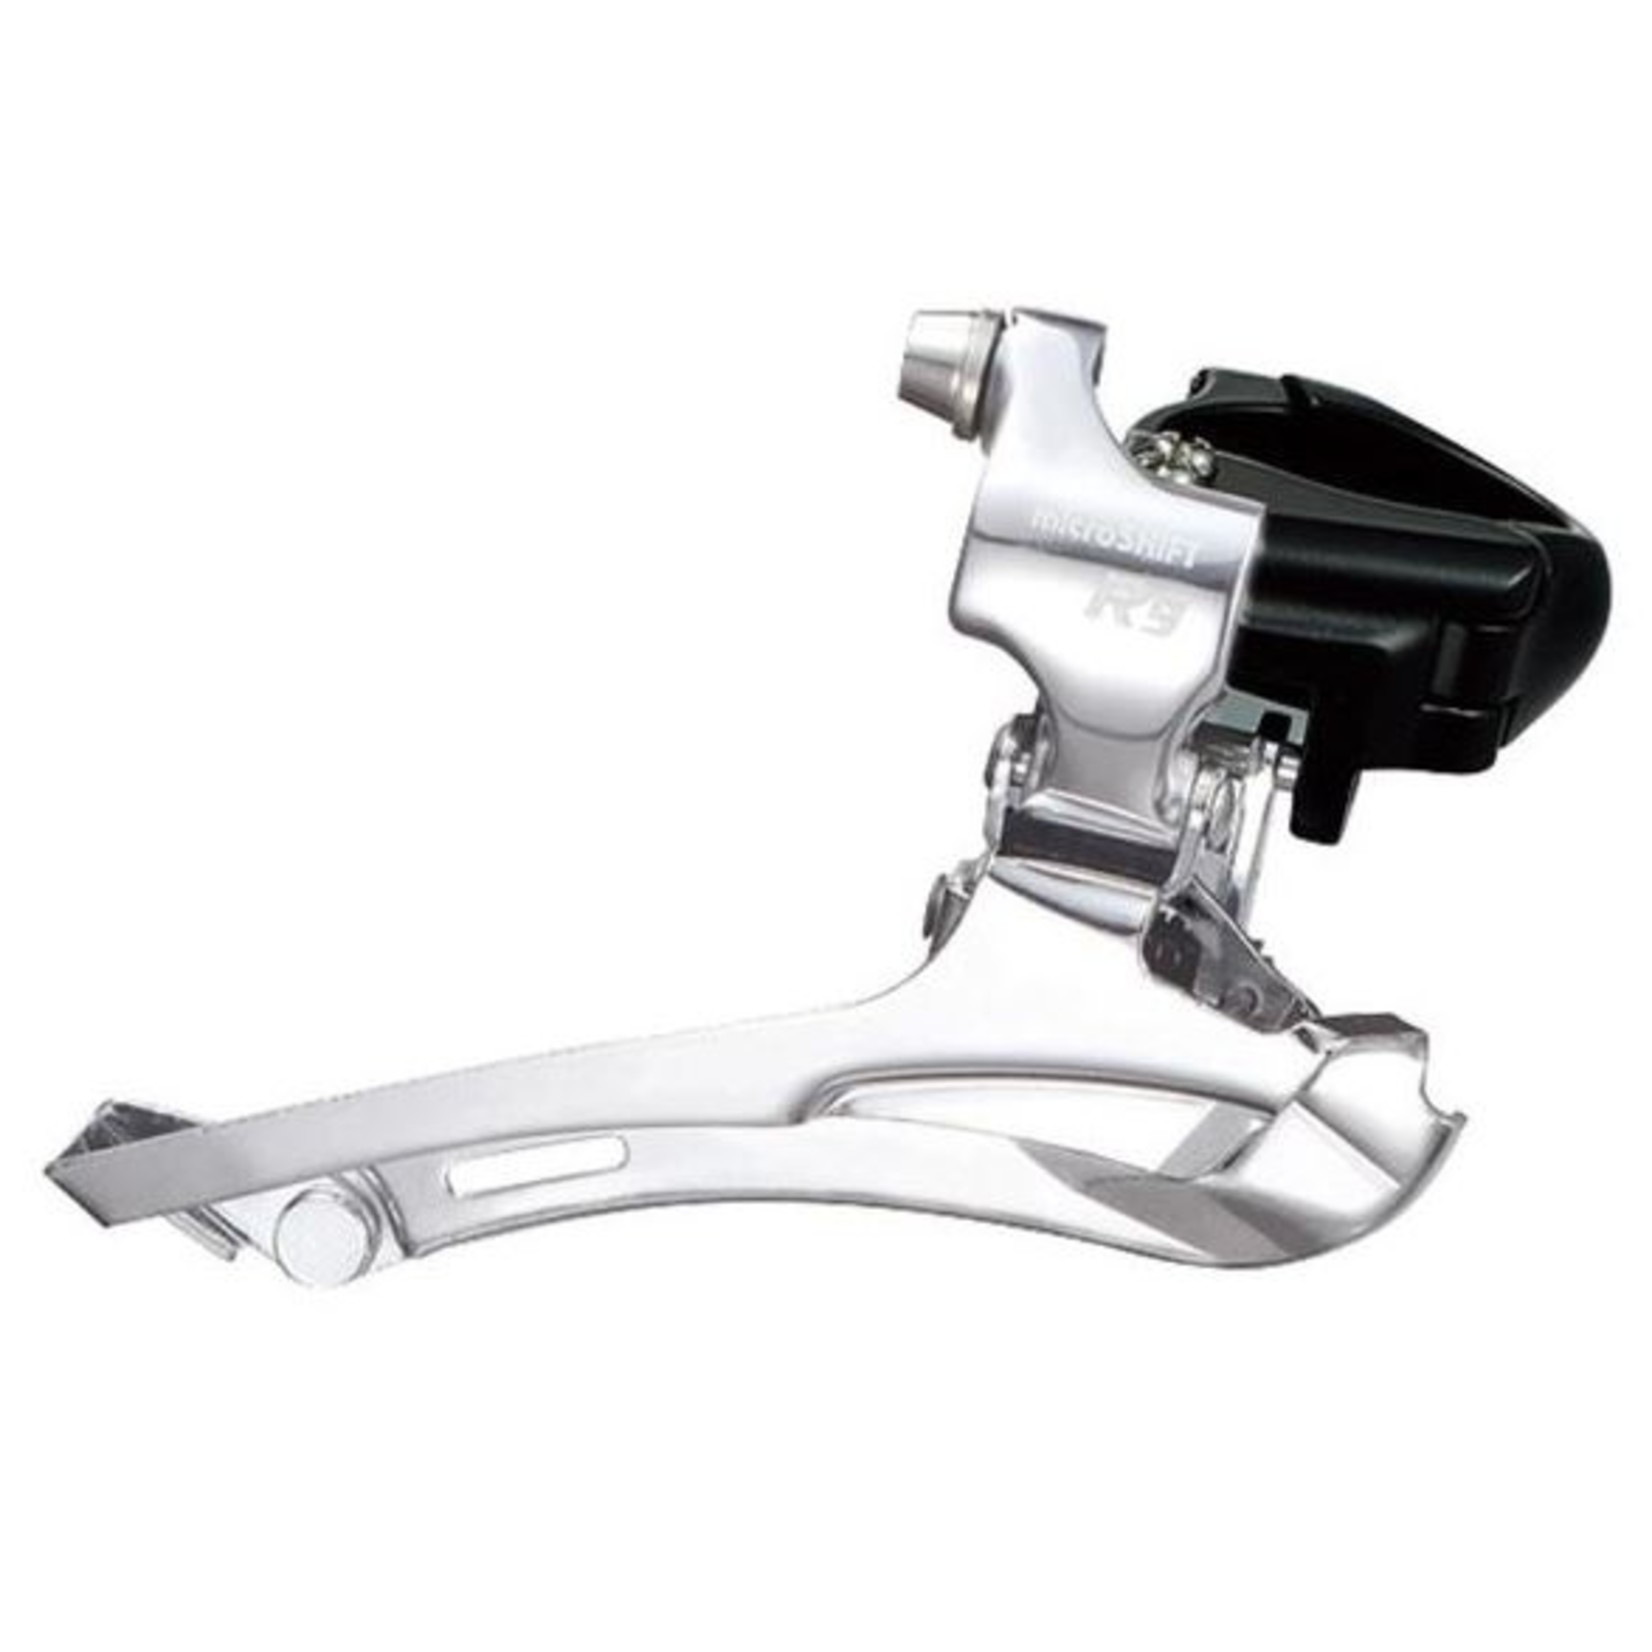 Microshift Microshift Front Derailleur - R9 Fd-R352 - 2X9 Speed - 46-52T - Clamp Mount